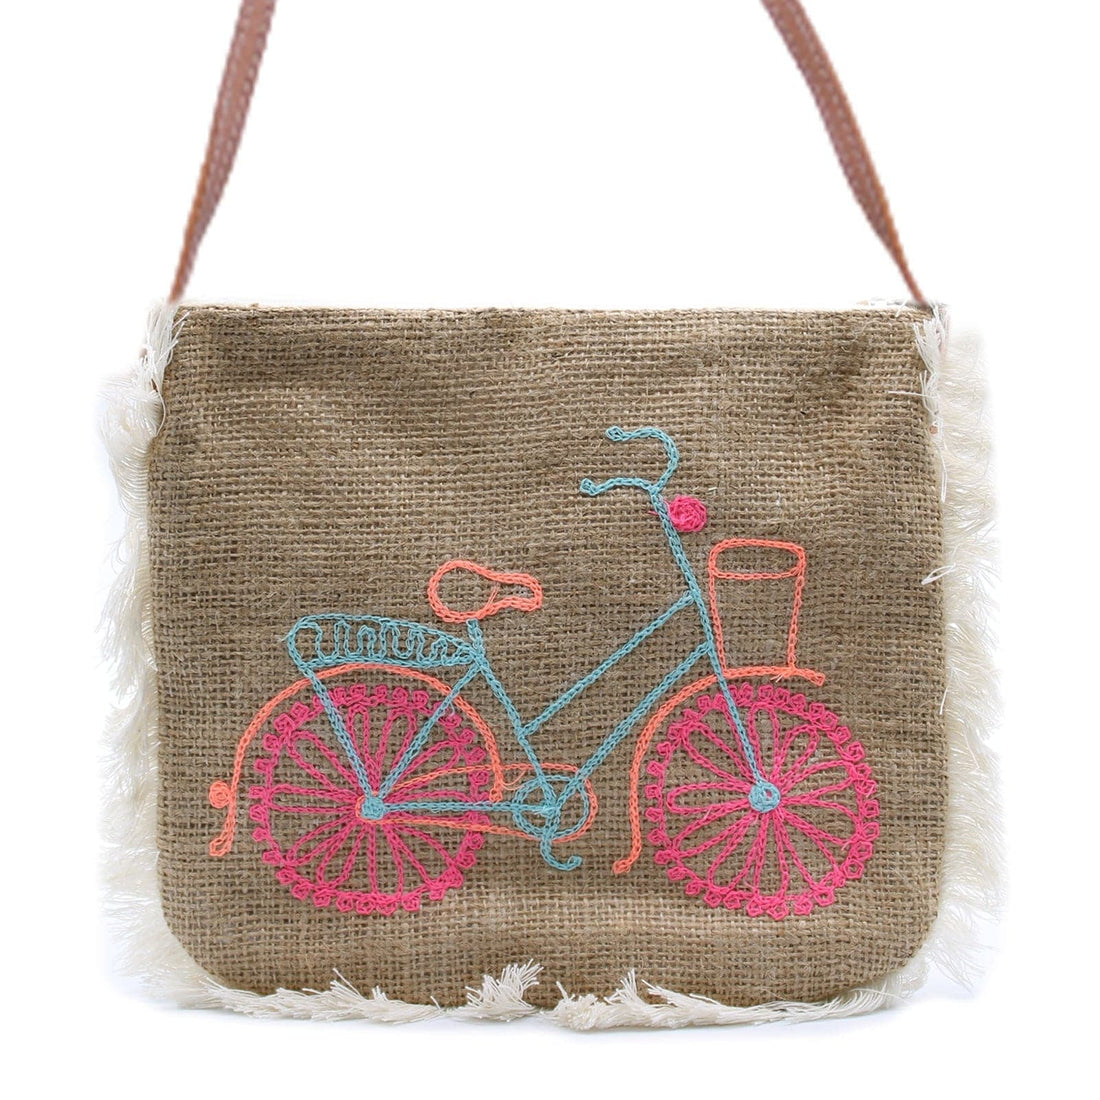 Fab Fringe Bag - Bicycle Embroidery - best price from Maltashopper.com FFB-04